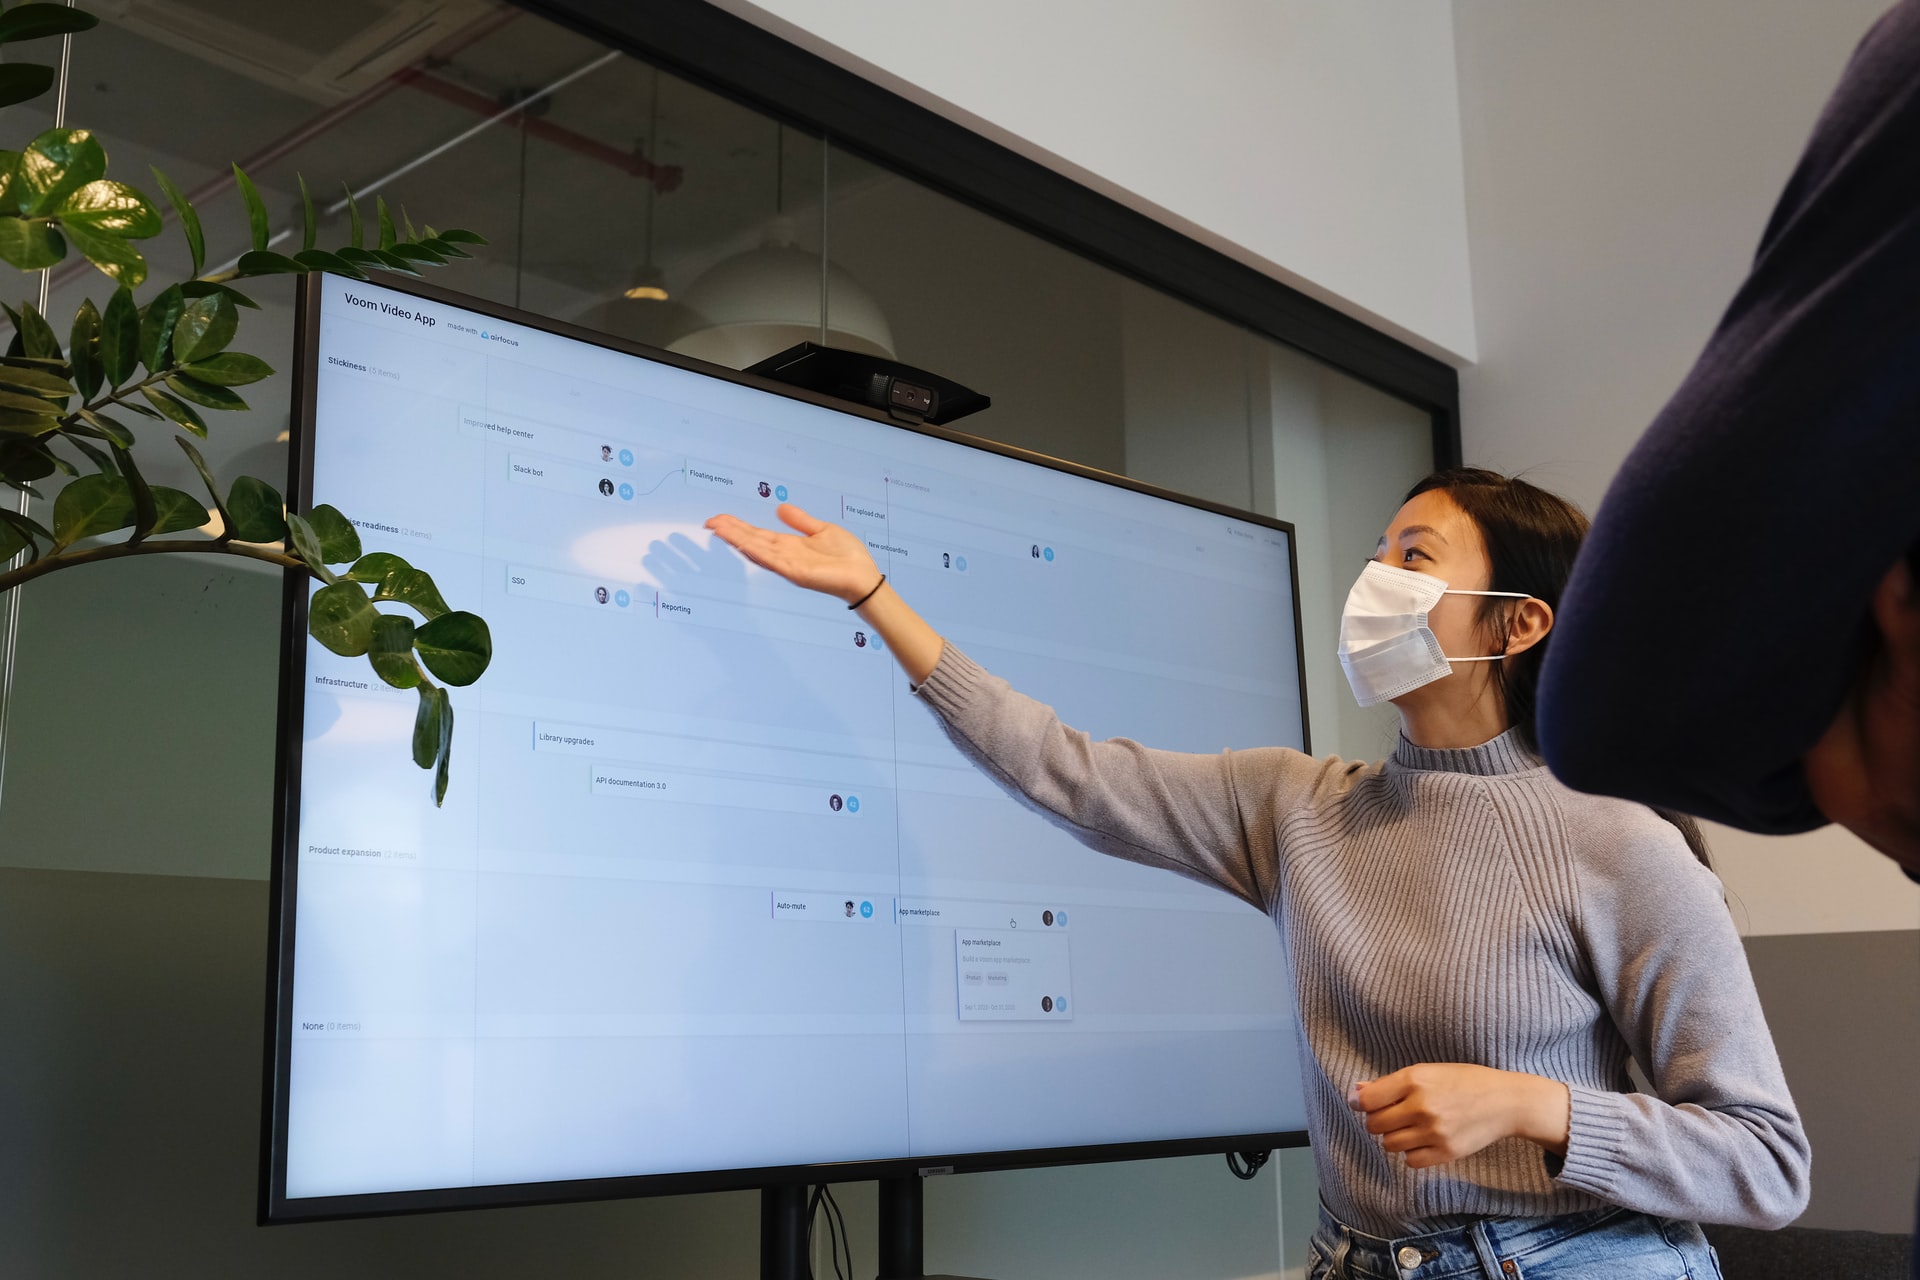 Young Asian woman with grey sweater and white mask holding out her hand to direct viewer's attention to application modernization timeline on television screen